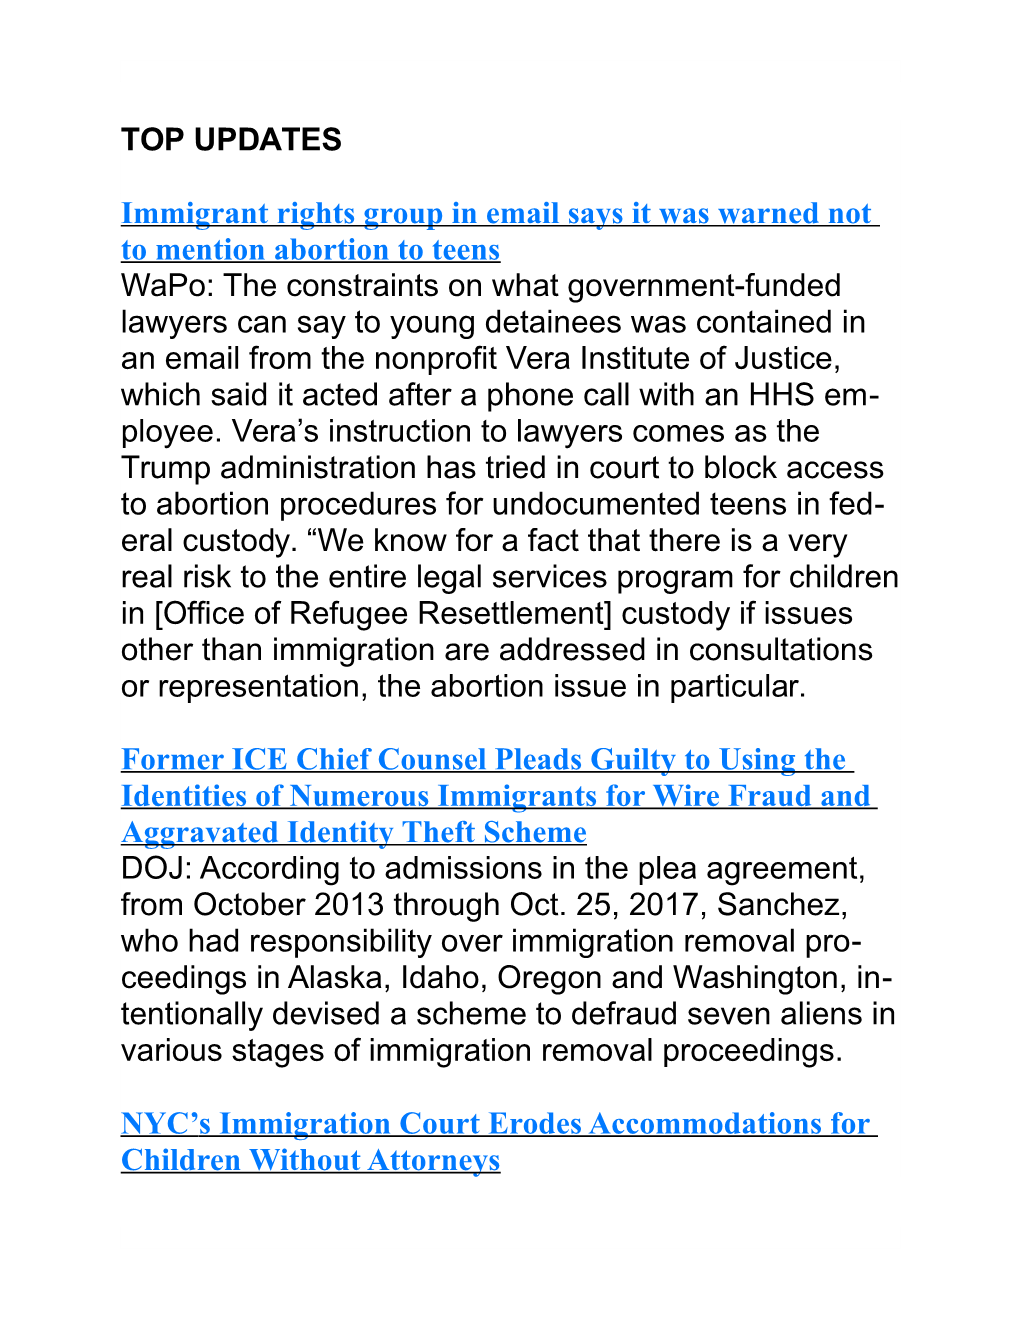 Immigrant Rights Group in Email Says It Was Warned Not to Mention Abortion to Teens